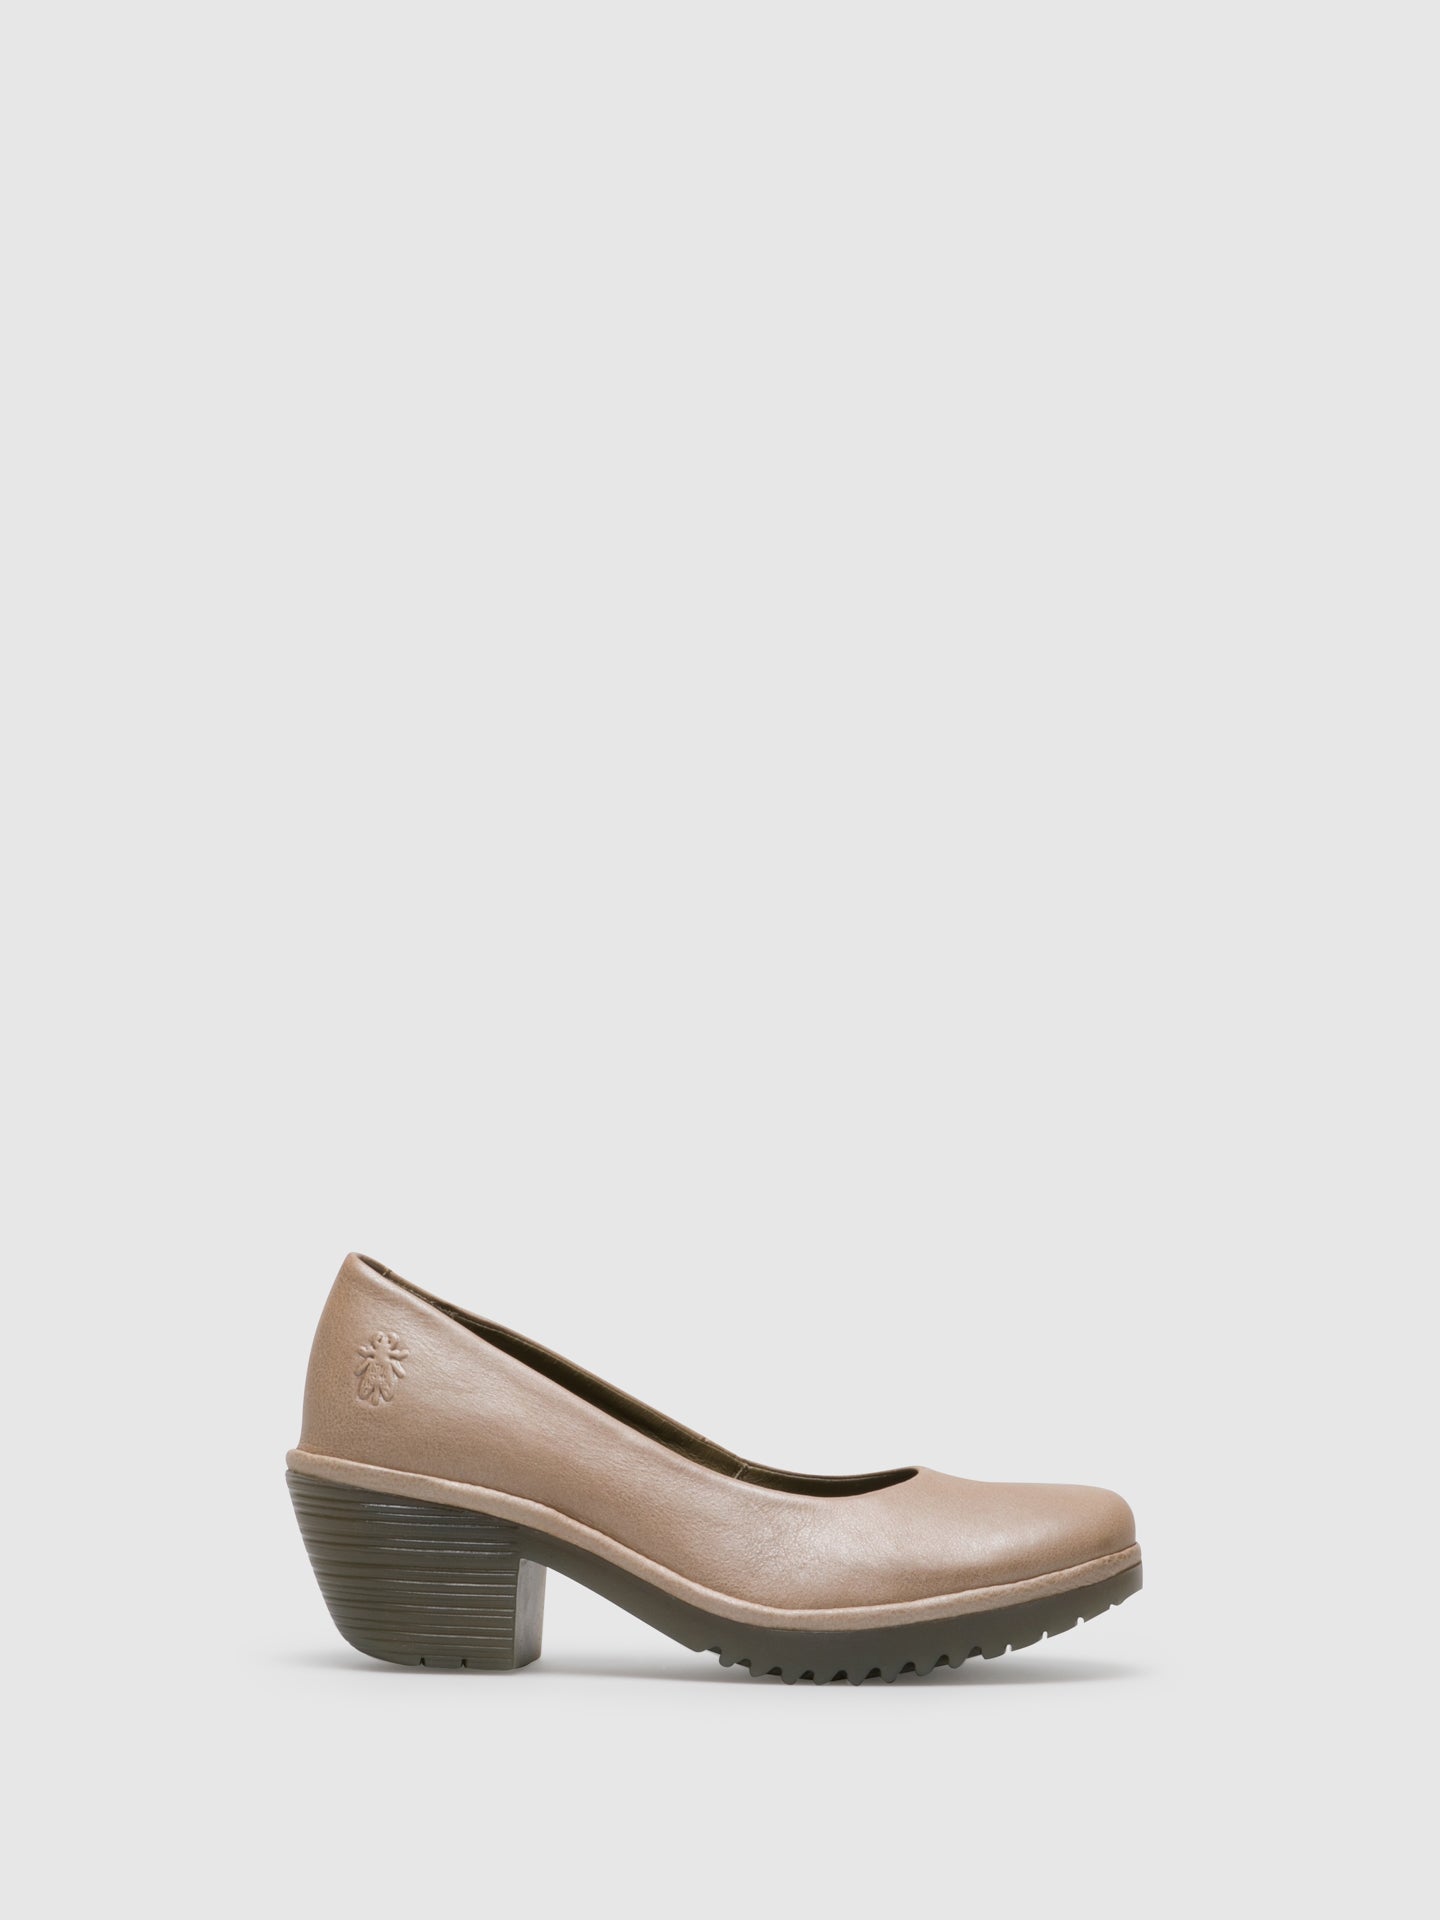 Fly London Beige Round Toe Shoes